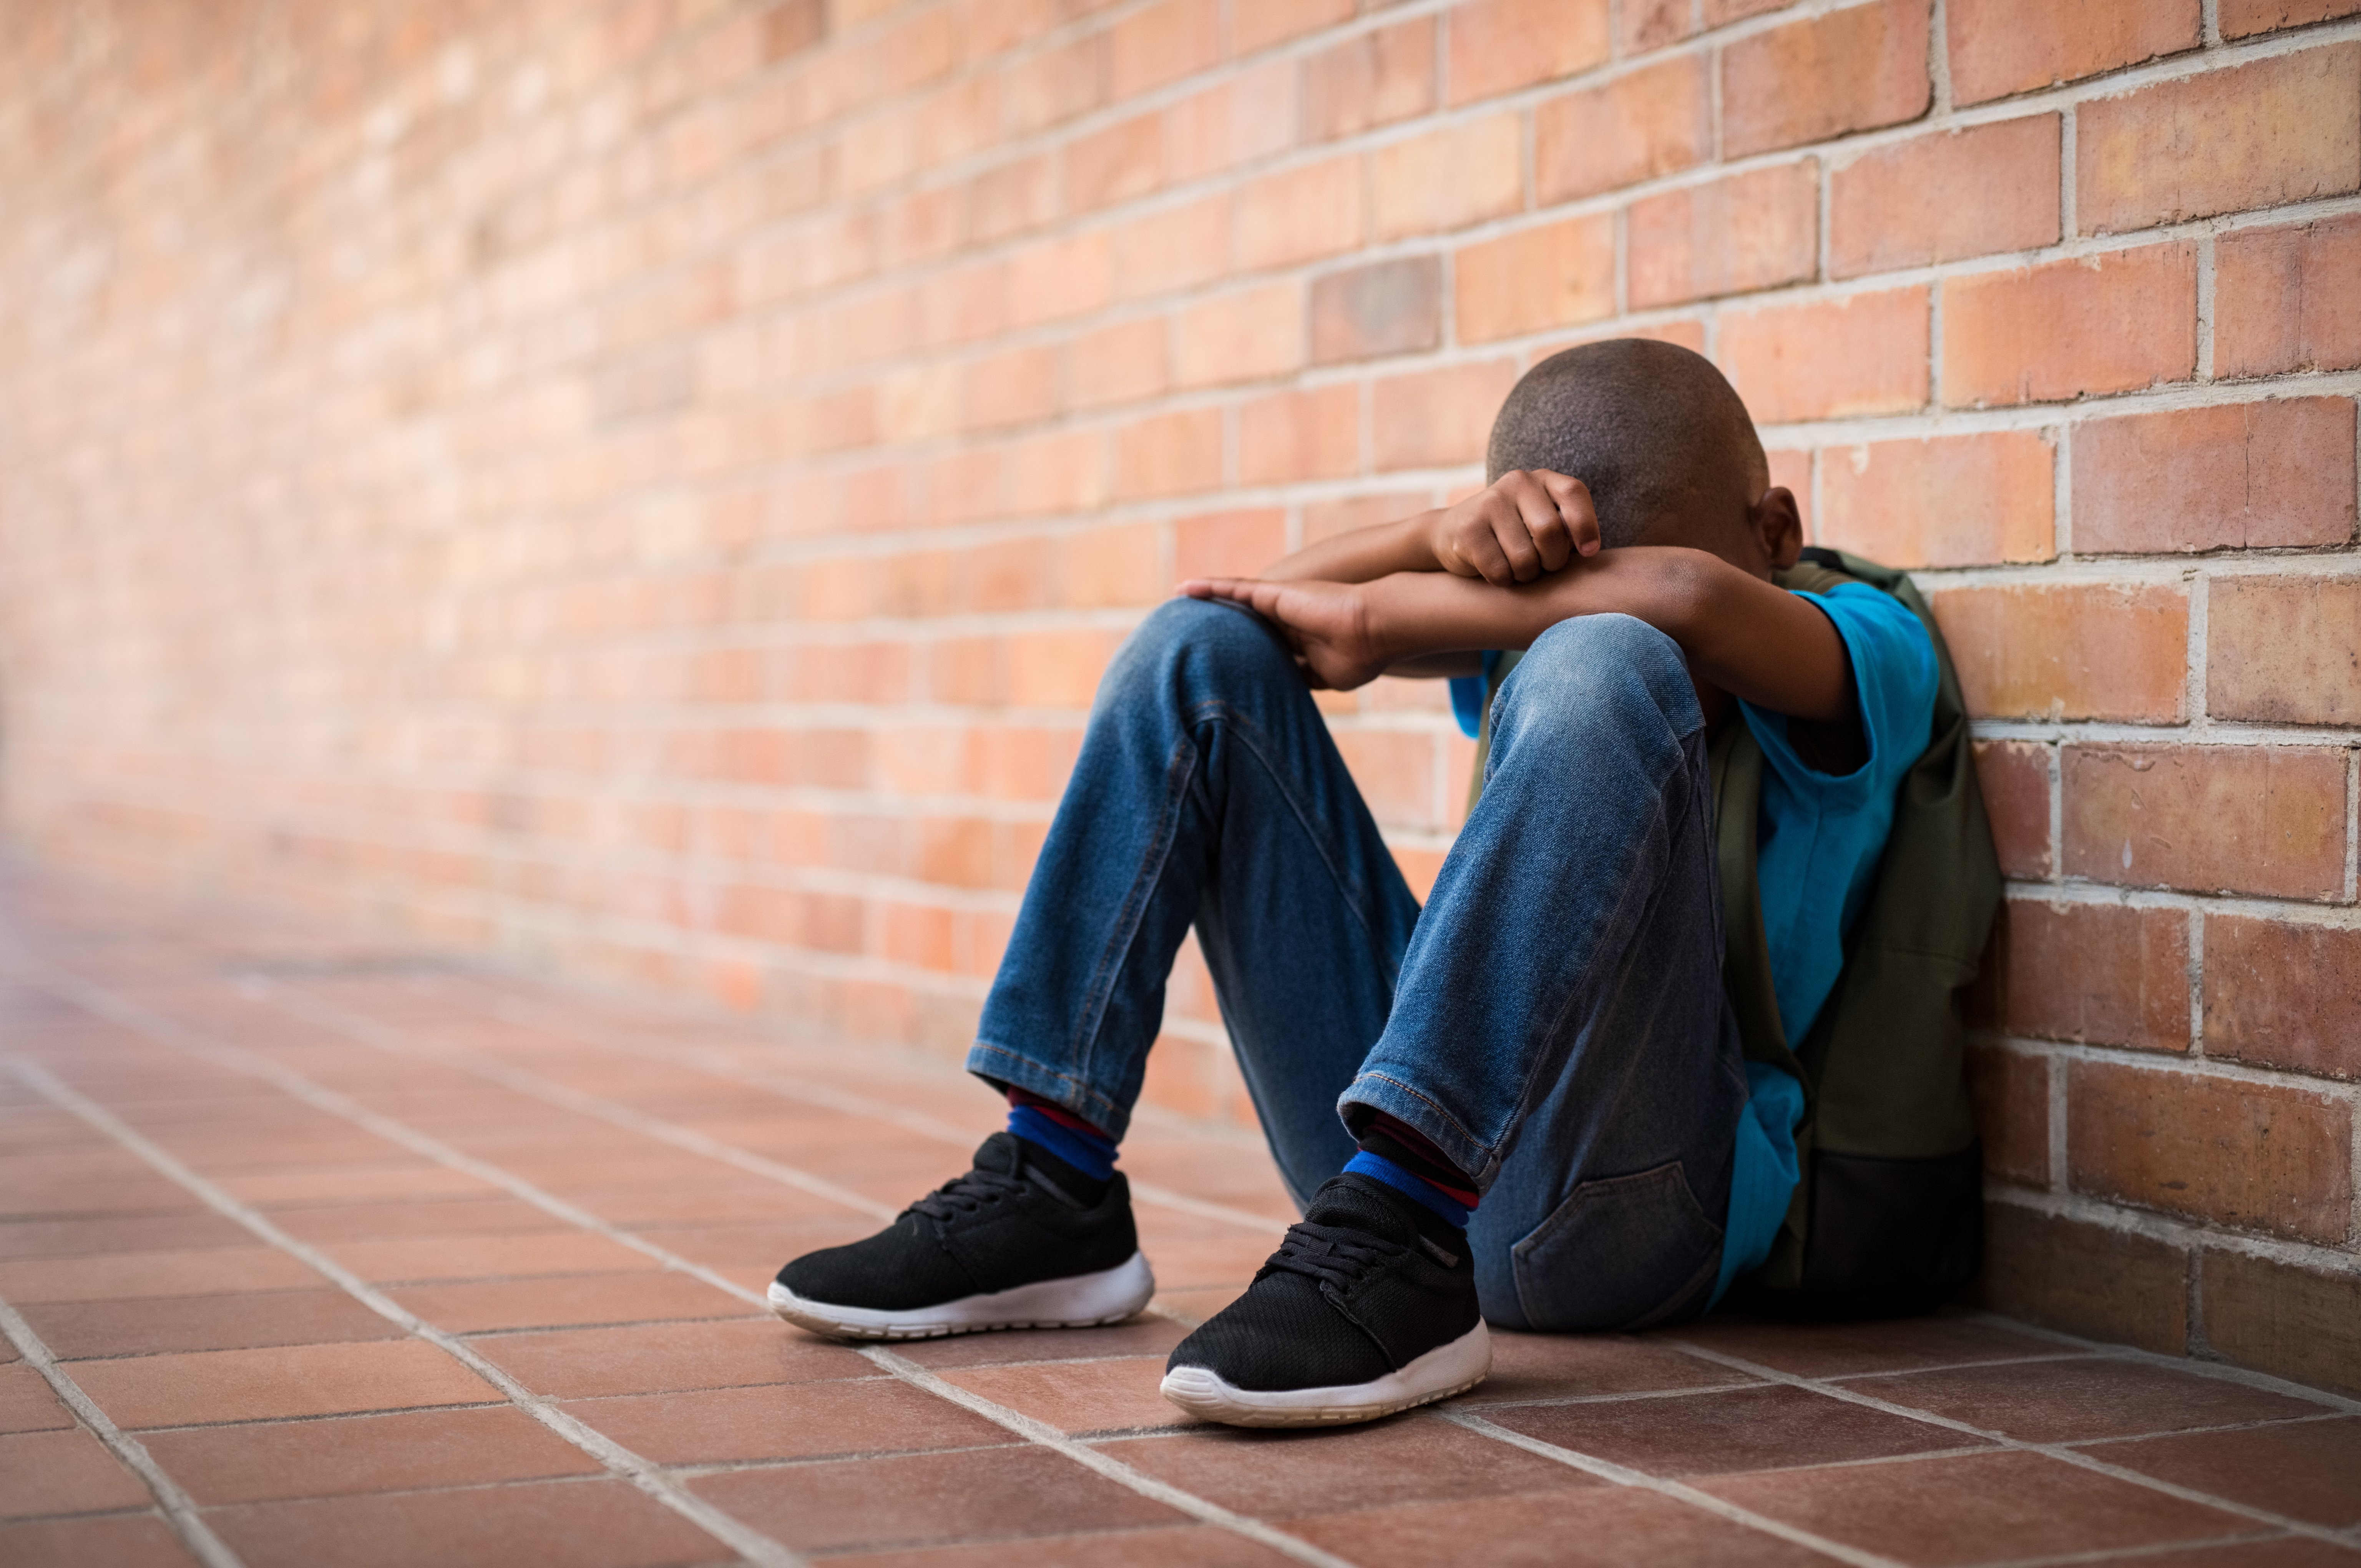 Picture of a sad young boy sitting in an empty brick corridor | Source: Shutterstock